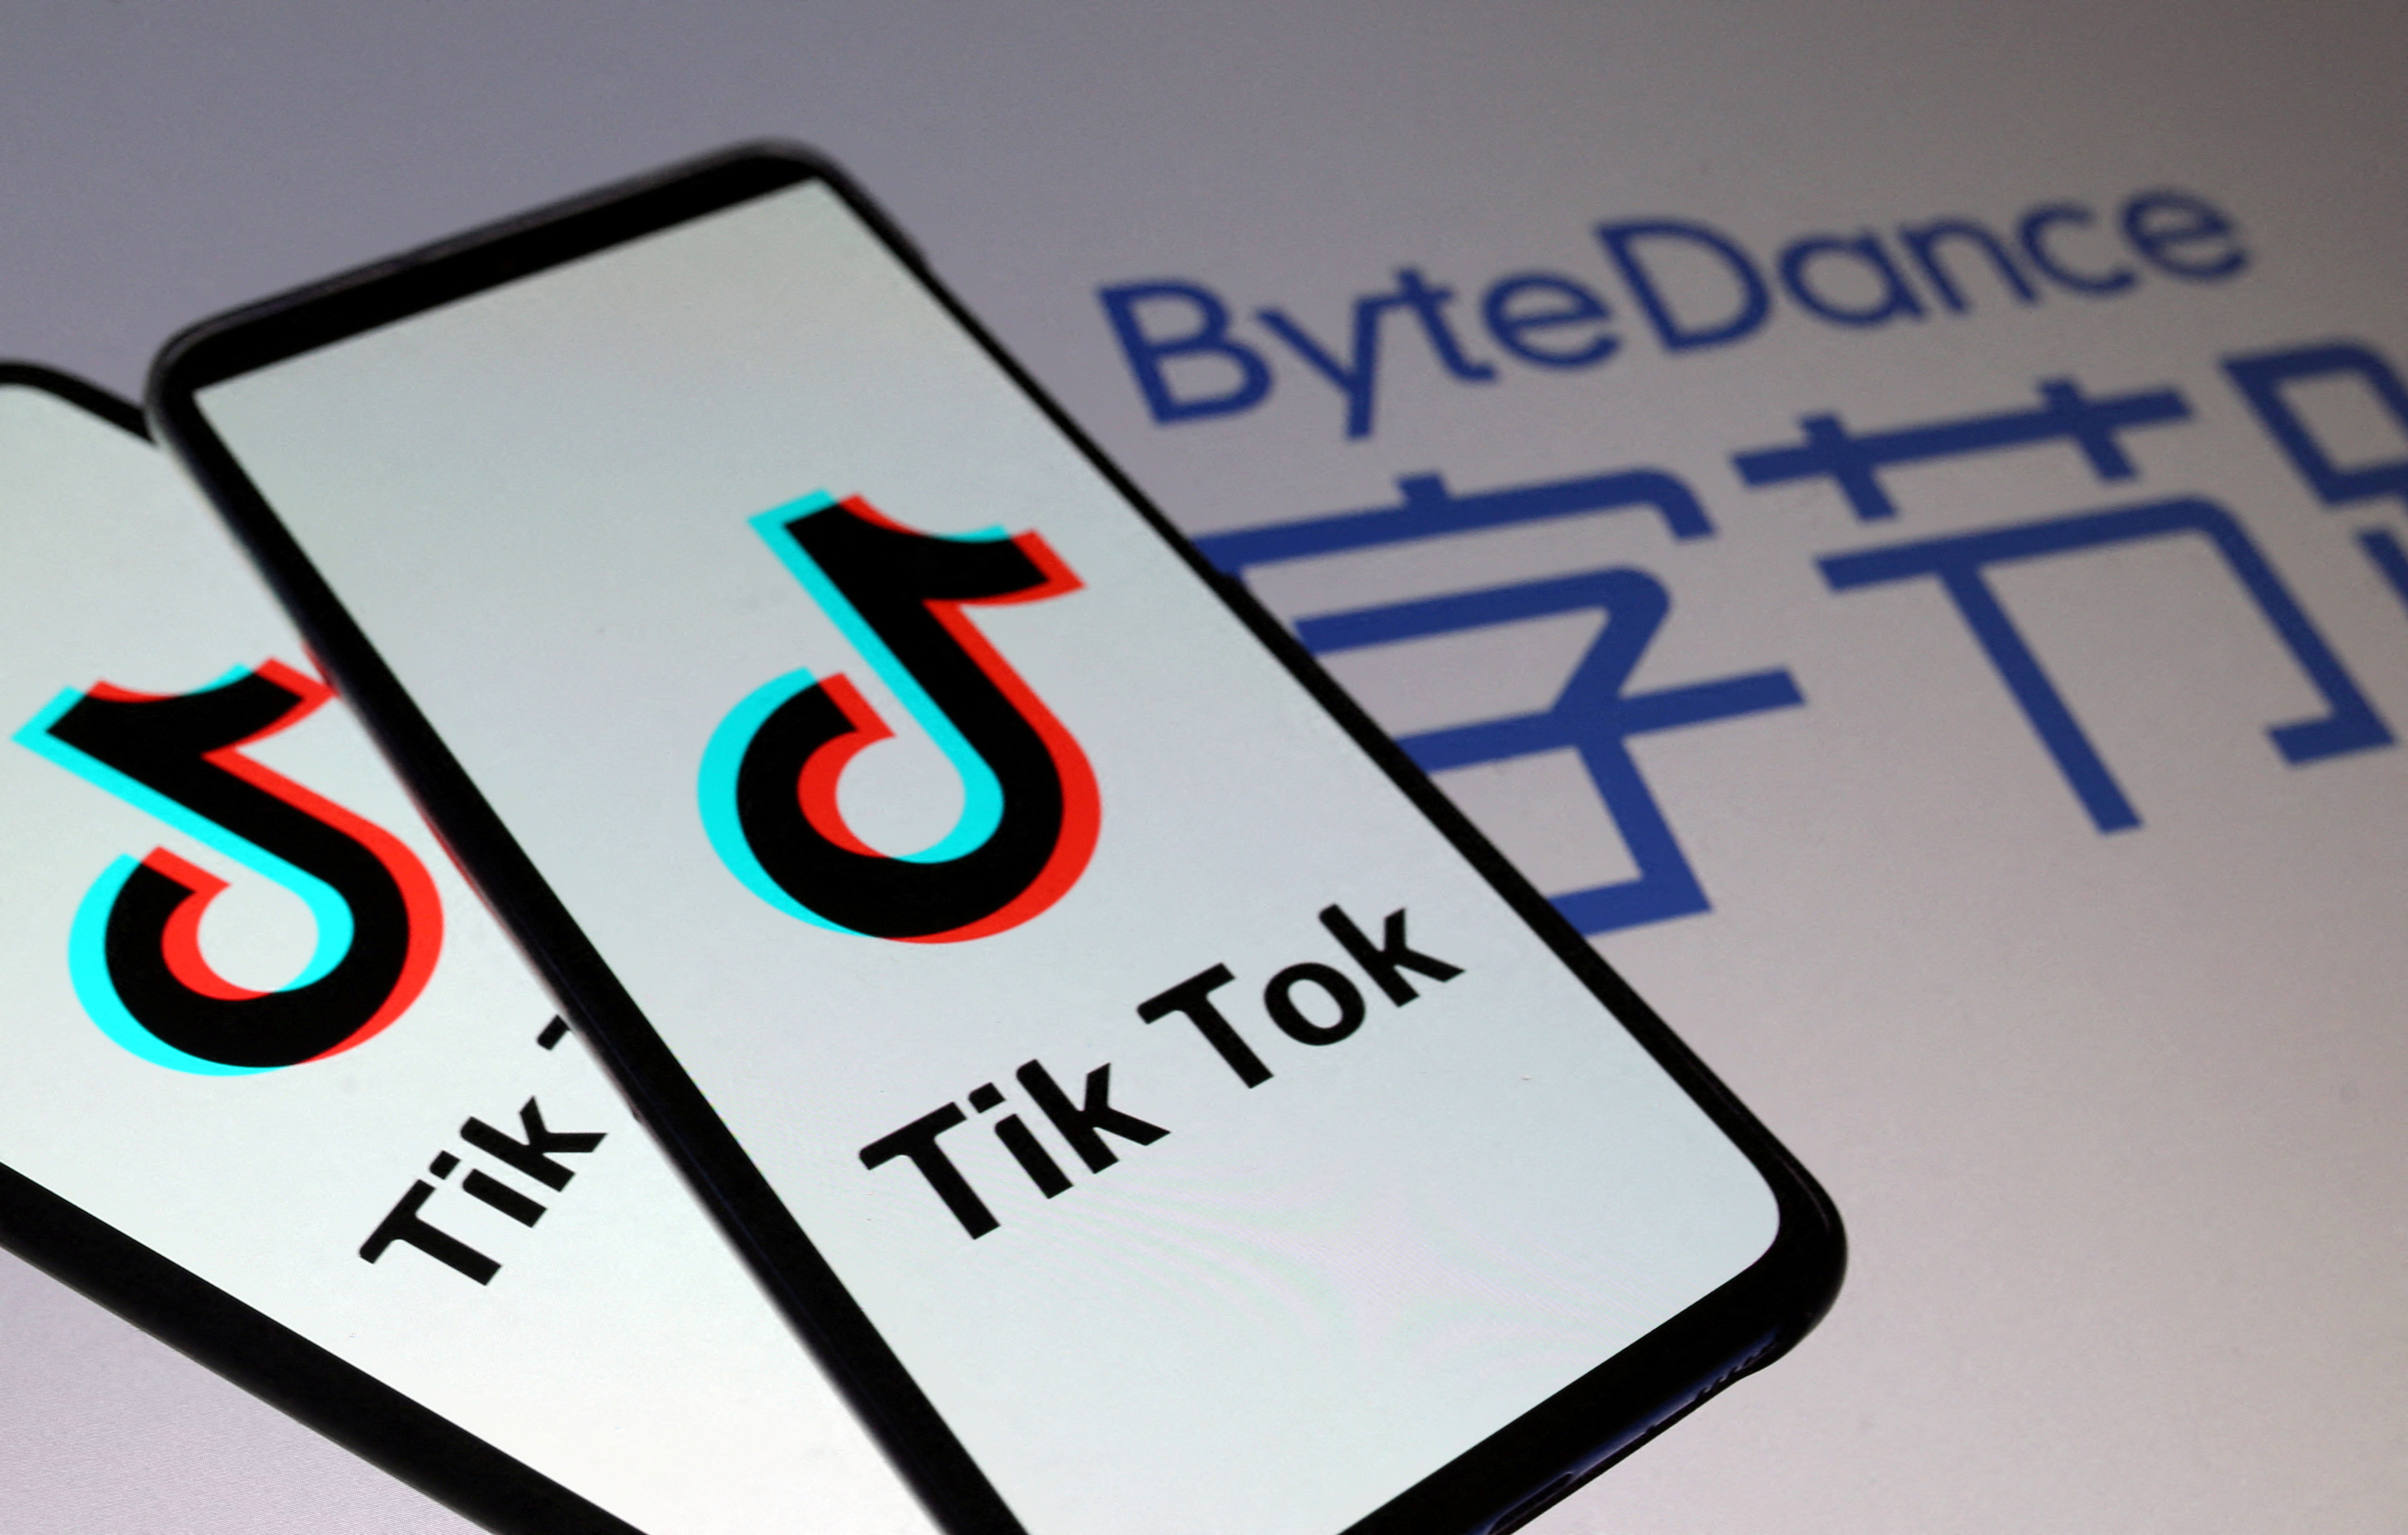 Tik Tok logos are seen on smartphones in front of a displayed ByteDance logo in this illustration taken November 27, 2019. REUTERS/Dado Ruvic/Illustration/File Photo